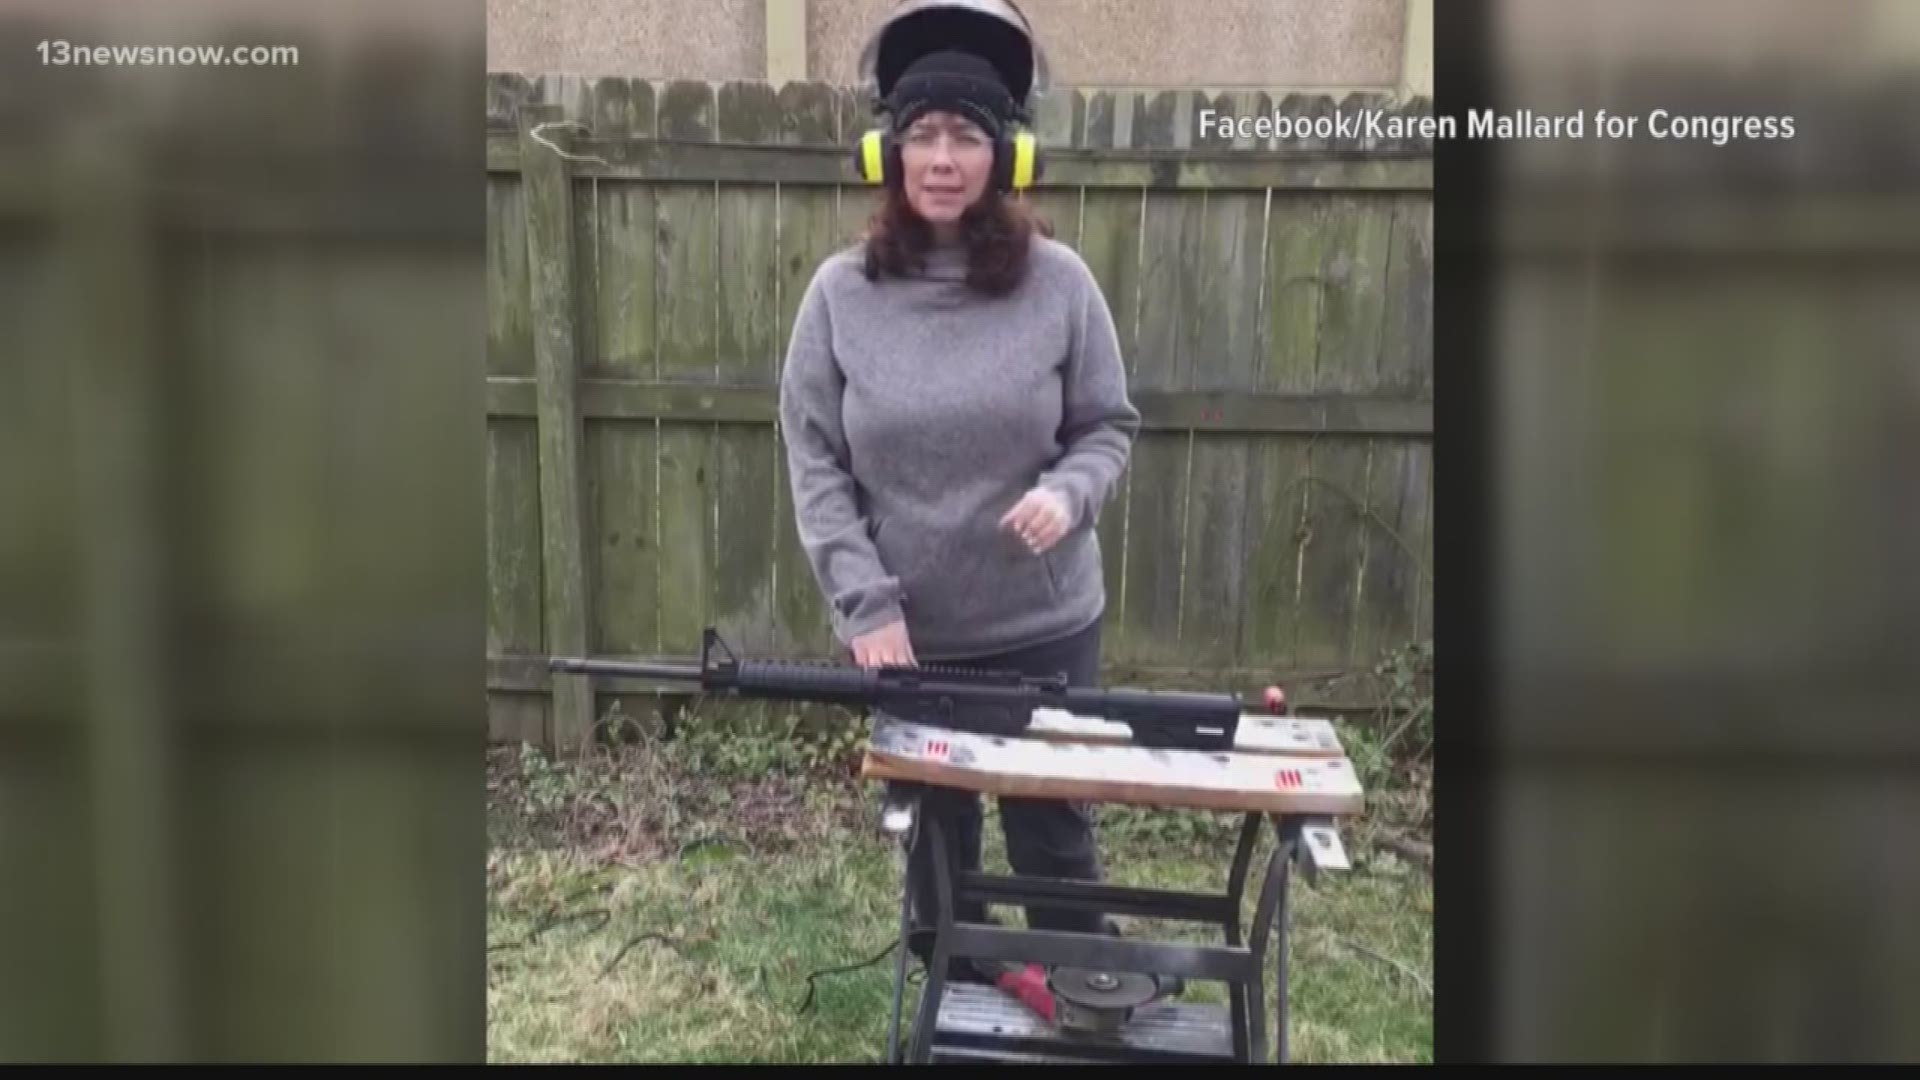 Congressional candidate Karen Mallard is under investigation after posting a video on social media showing her sawing an AR-15 into pieces.